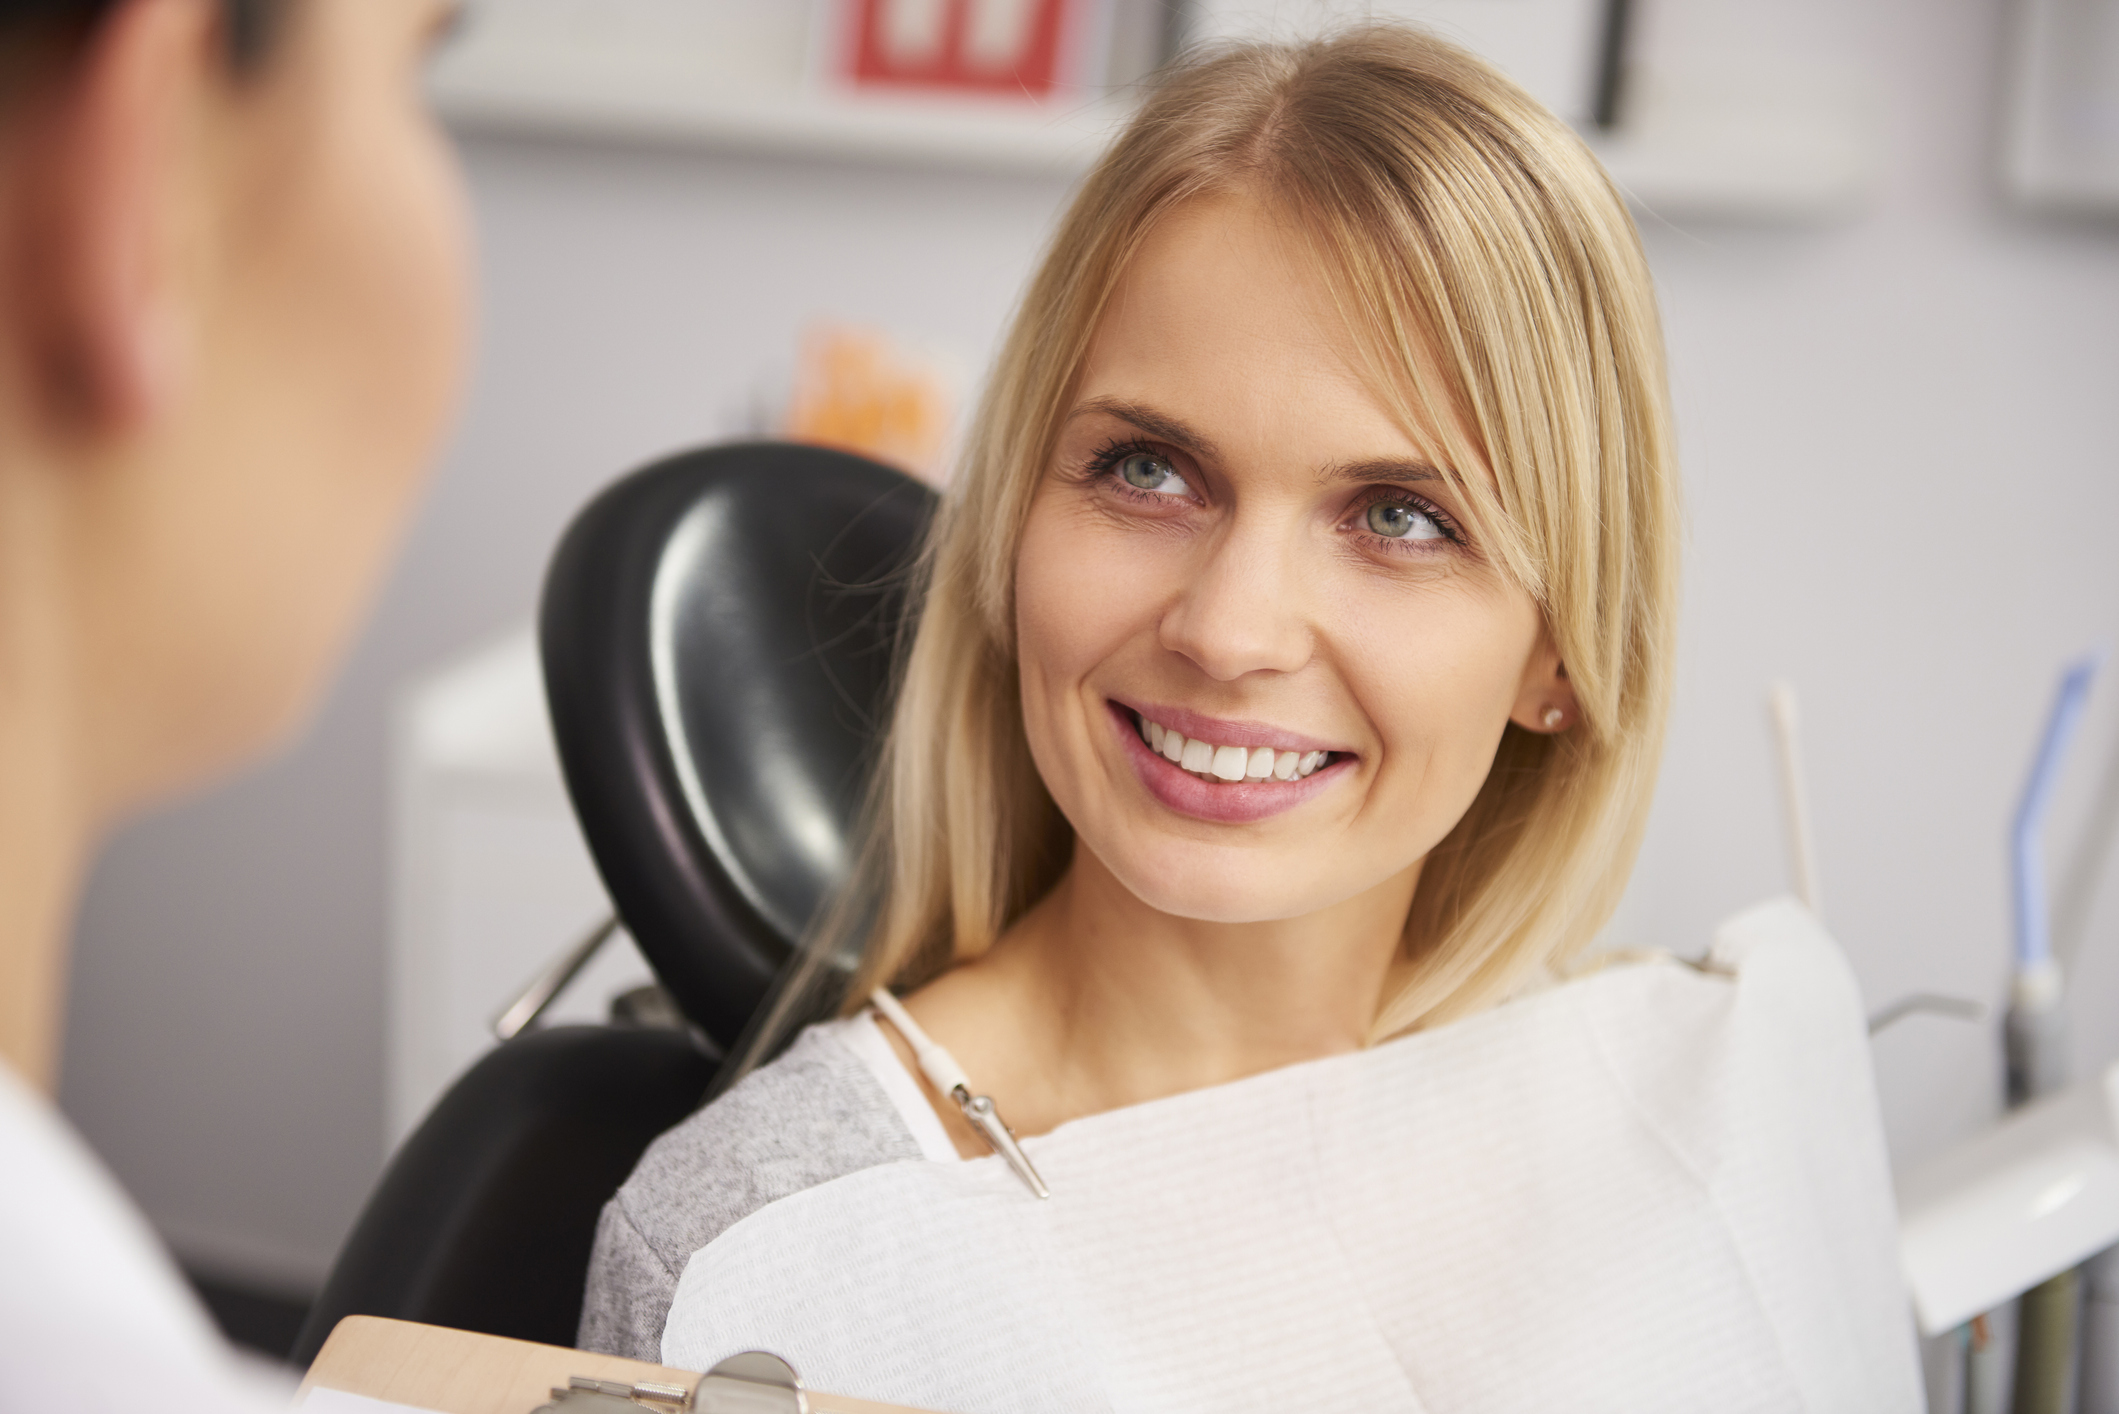 Pleased and smiling woman in dentist’s clinic